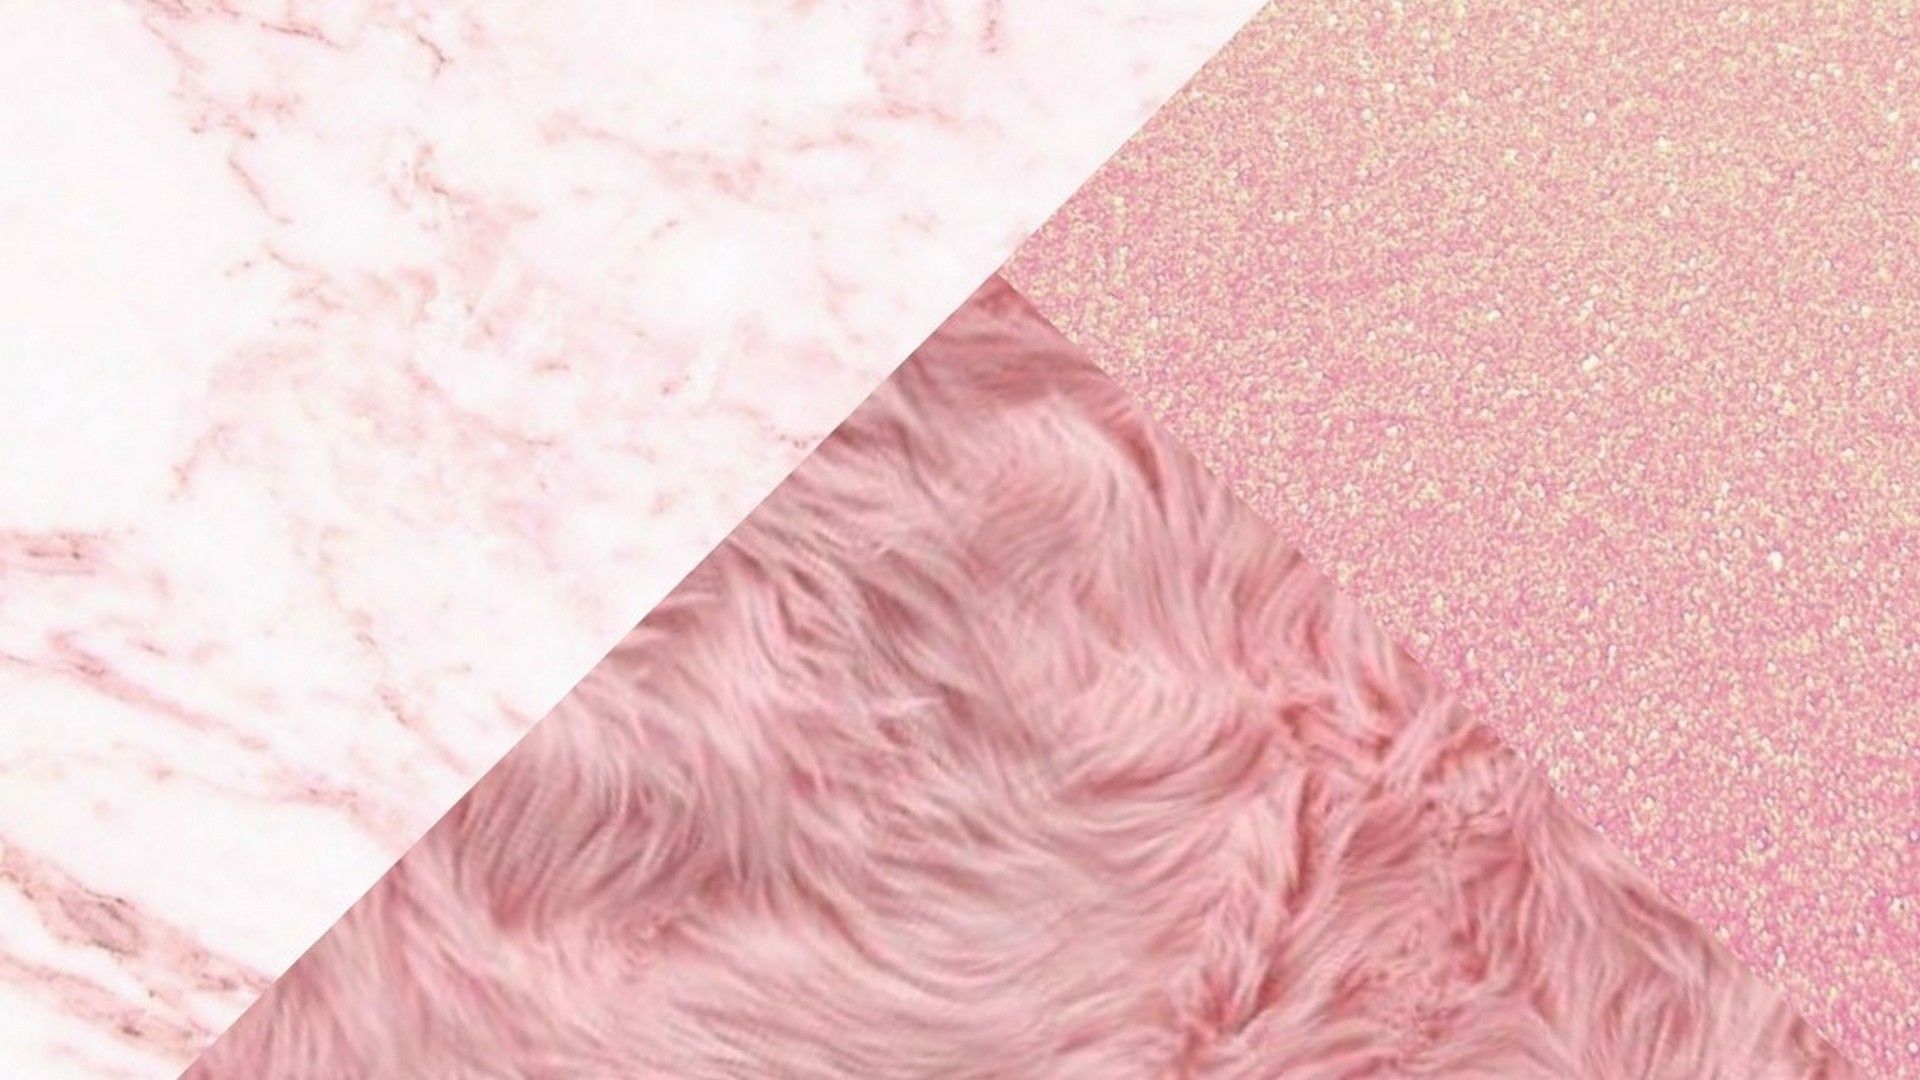 A collection of marble, fur, and glitter backgrounds - Rose gold